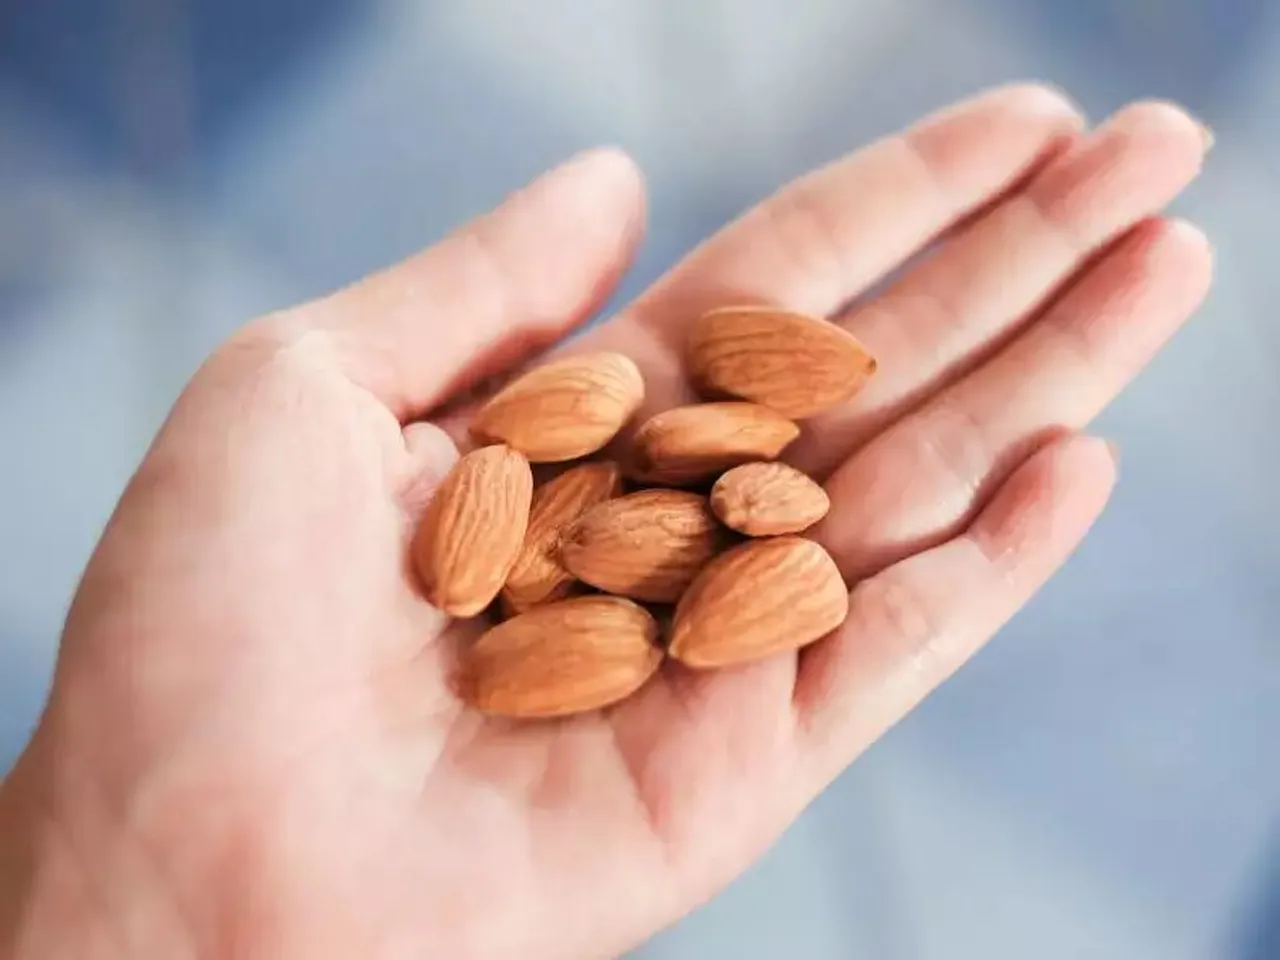 Does eating almonds daily improves diabetes risk factors?